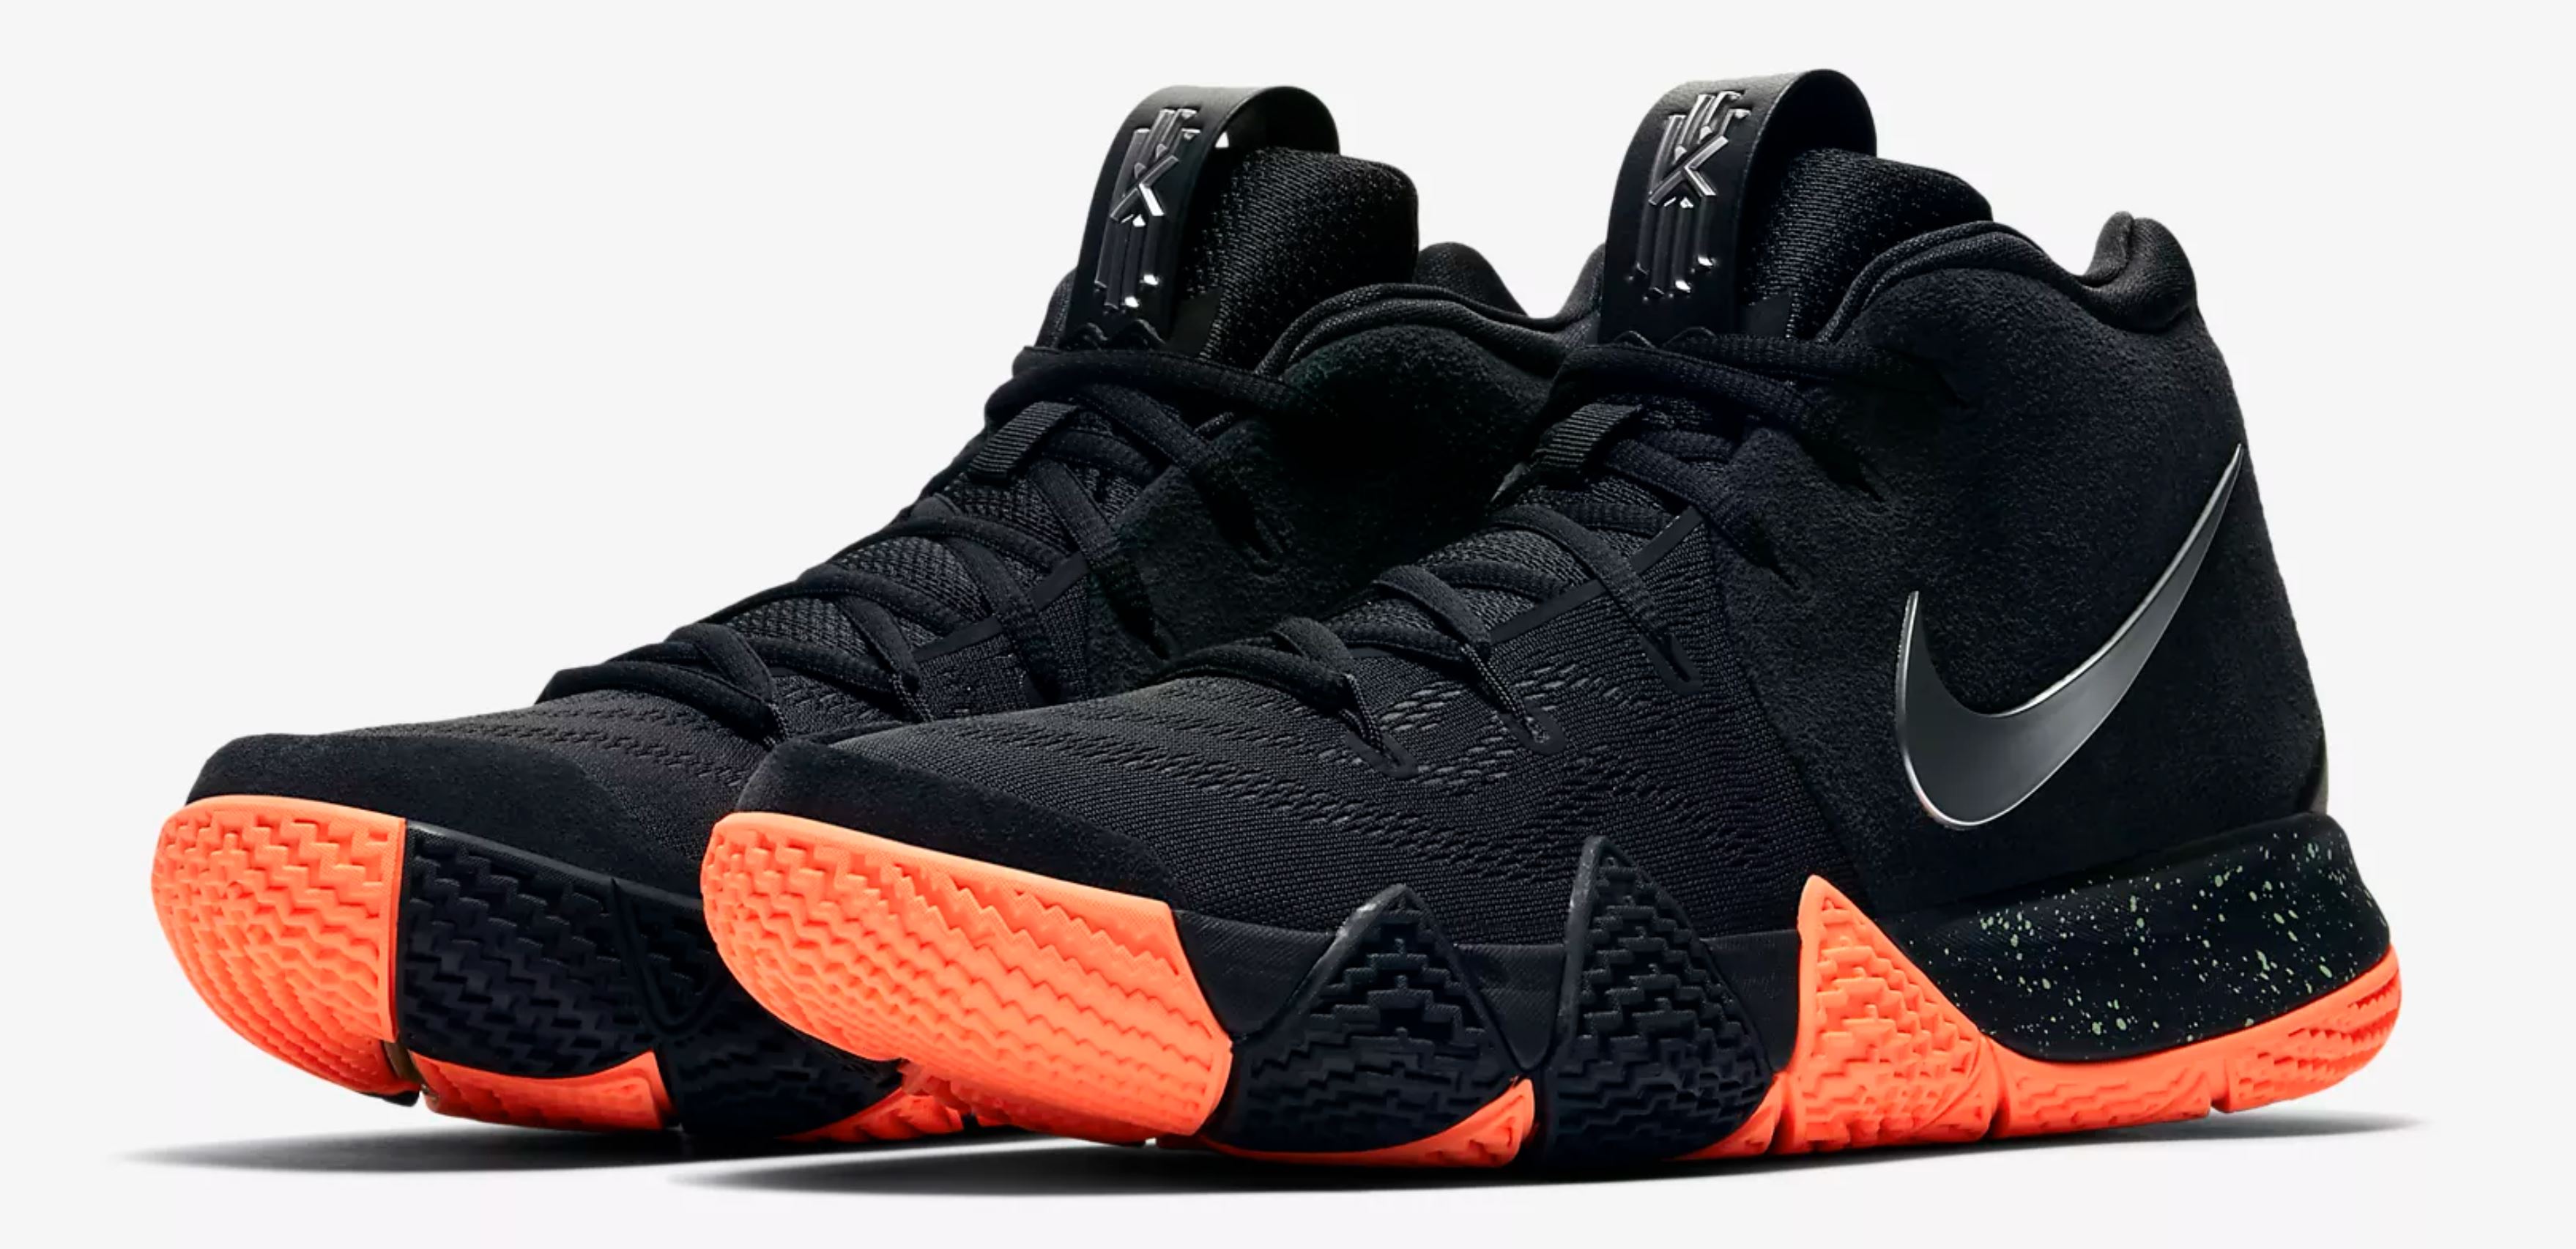 New Nike Kyrie 4 Colorway Has Landed at 